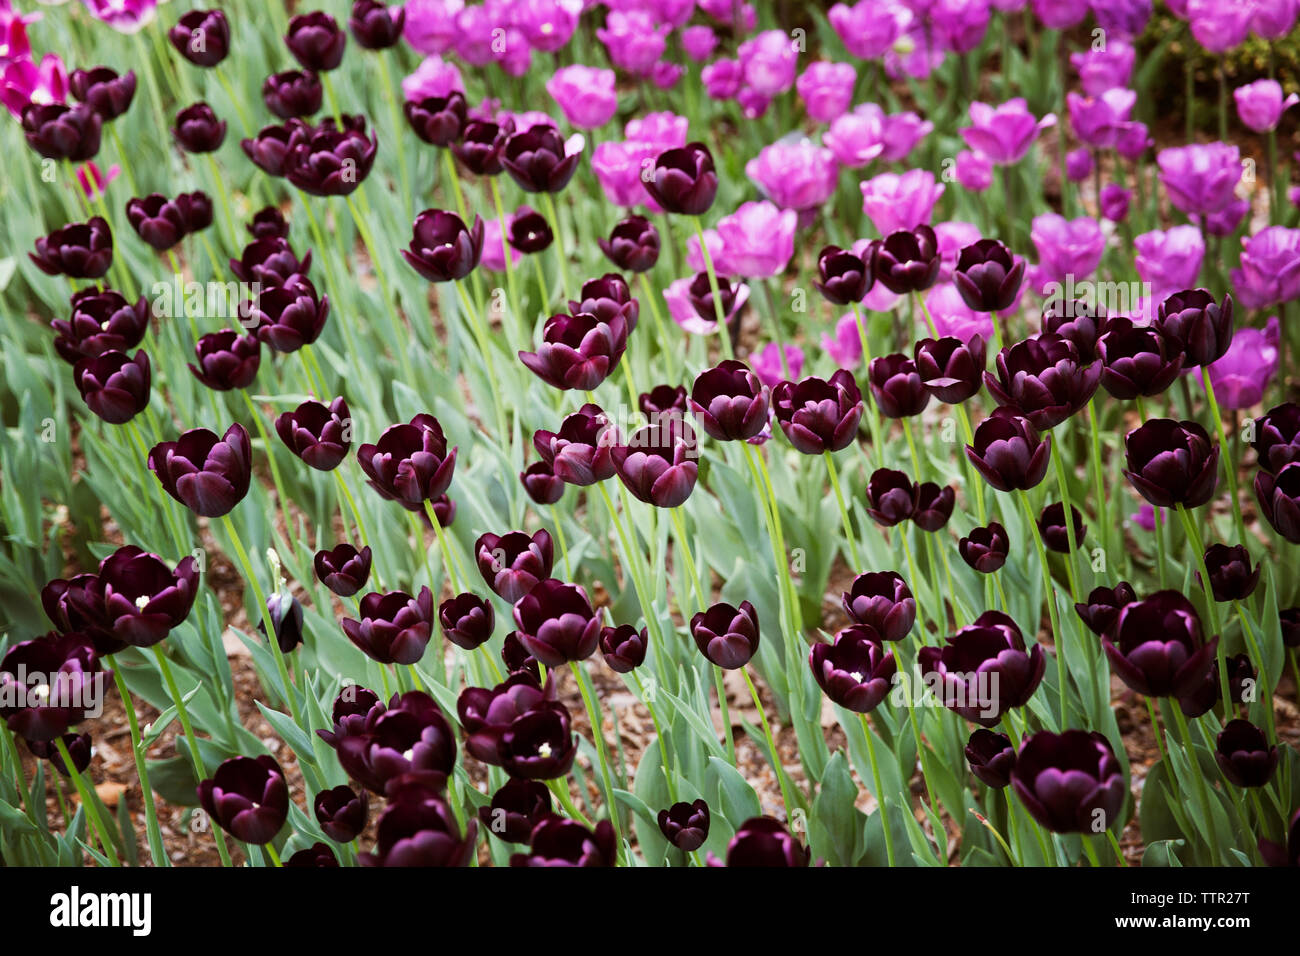 High angle view of purple tulips blooming on field Stock Photo